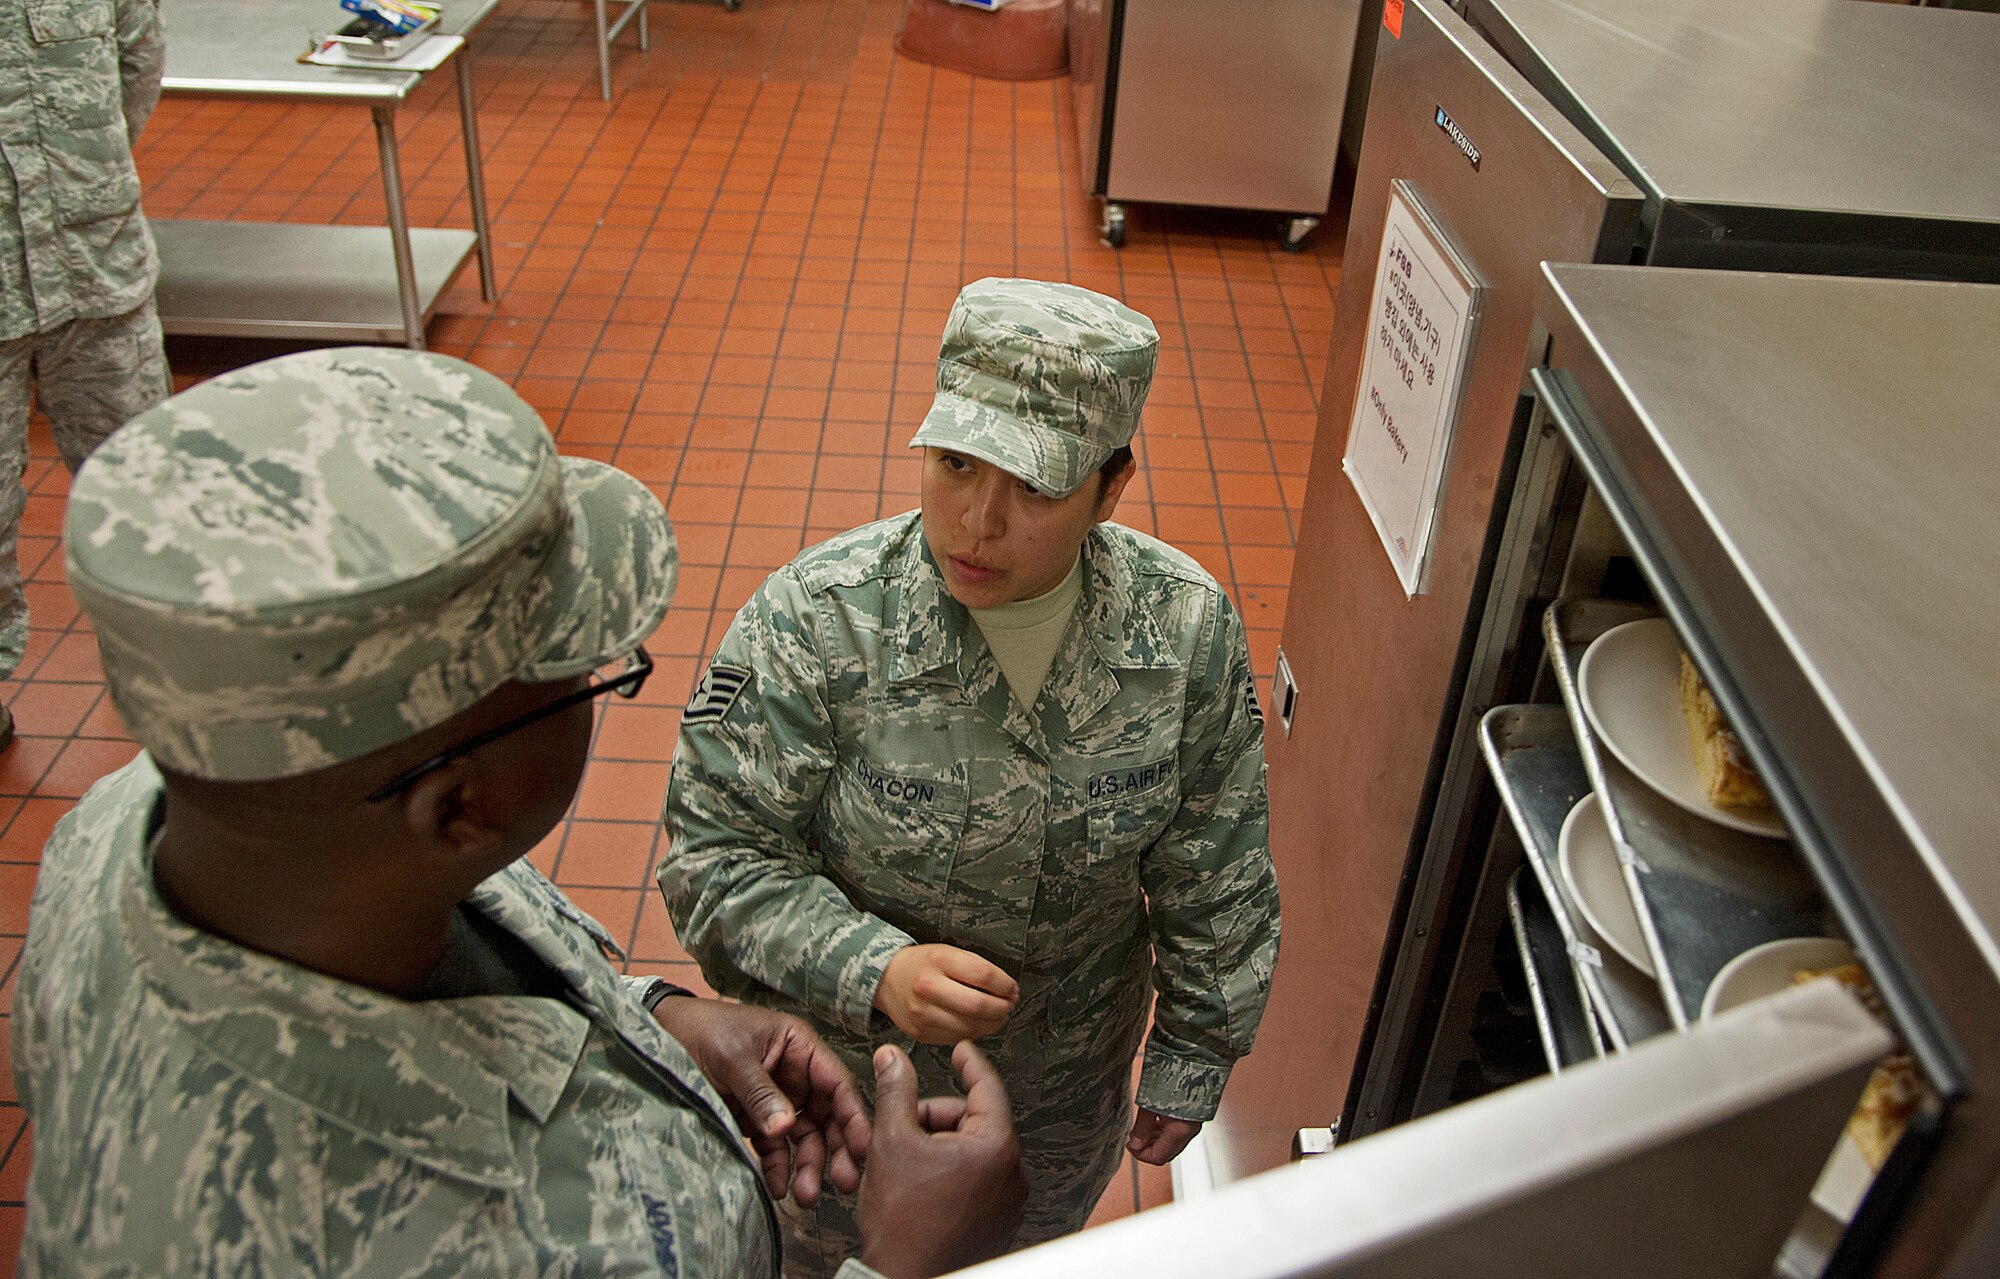 Staff Sgt. Angelica Chacon, 8th Medical Group force health noncommissioned officer in charge of force health, and Chief Master Sgt. Lee “Wolf Chief” Barr, 8th Fighter Wing command chief, inspect the dessert refrigerator during a health inspection at the O’Malley Dining Facility Sept. 12, 2014, at Kunsan Air Base, Republic of Korea.  Chacon was recognized by the 8 MDG as one of their outstanding performers and got a chance to show Wolf and Wolf Chief how she contributes to the Wolf Pack mission. (U.S. Air Force photo by Senior Airman Divine Cox)